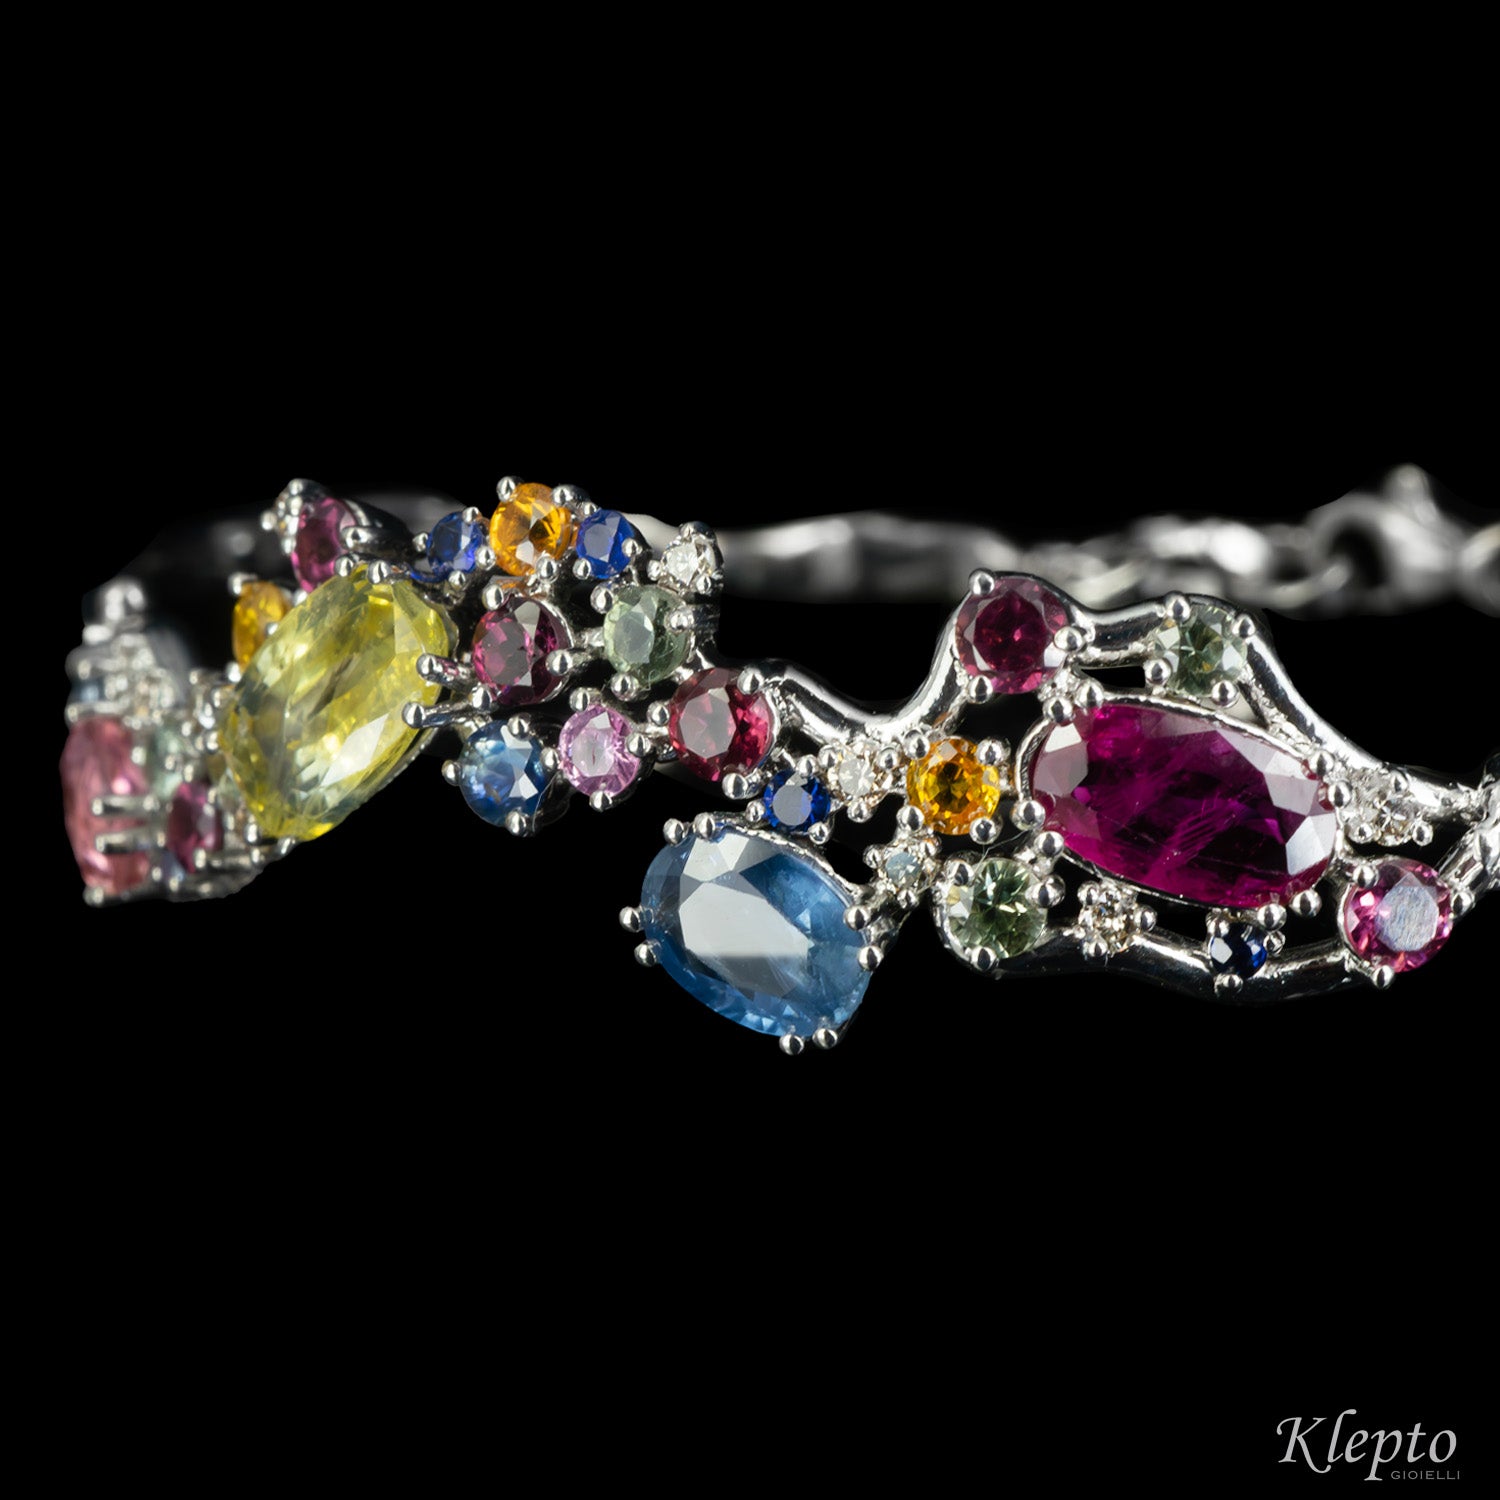 White gold bracelet with Sapphires, Rubies, Diamonds and Rhodolites